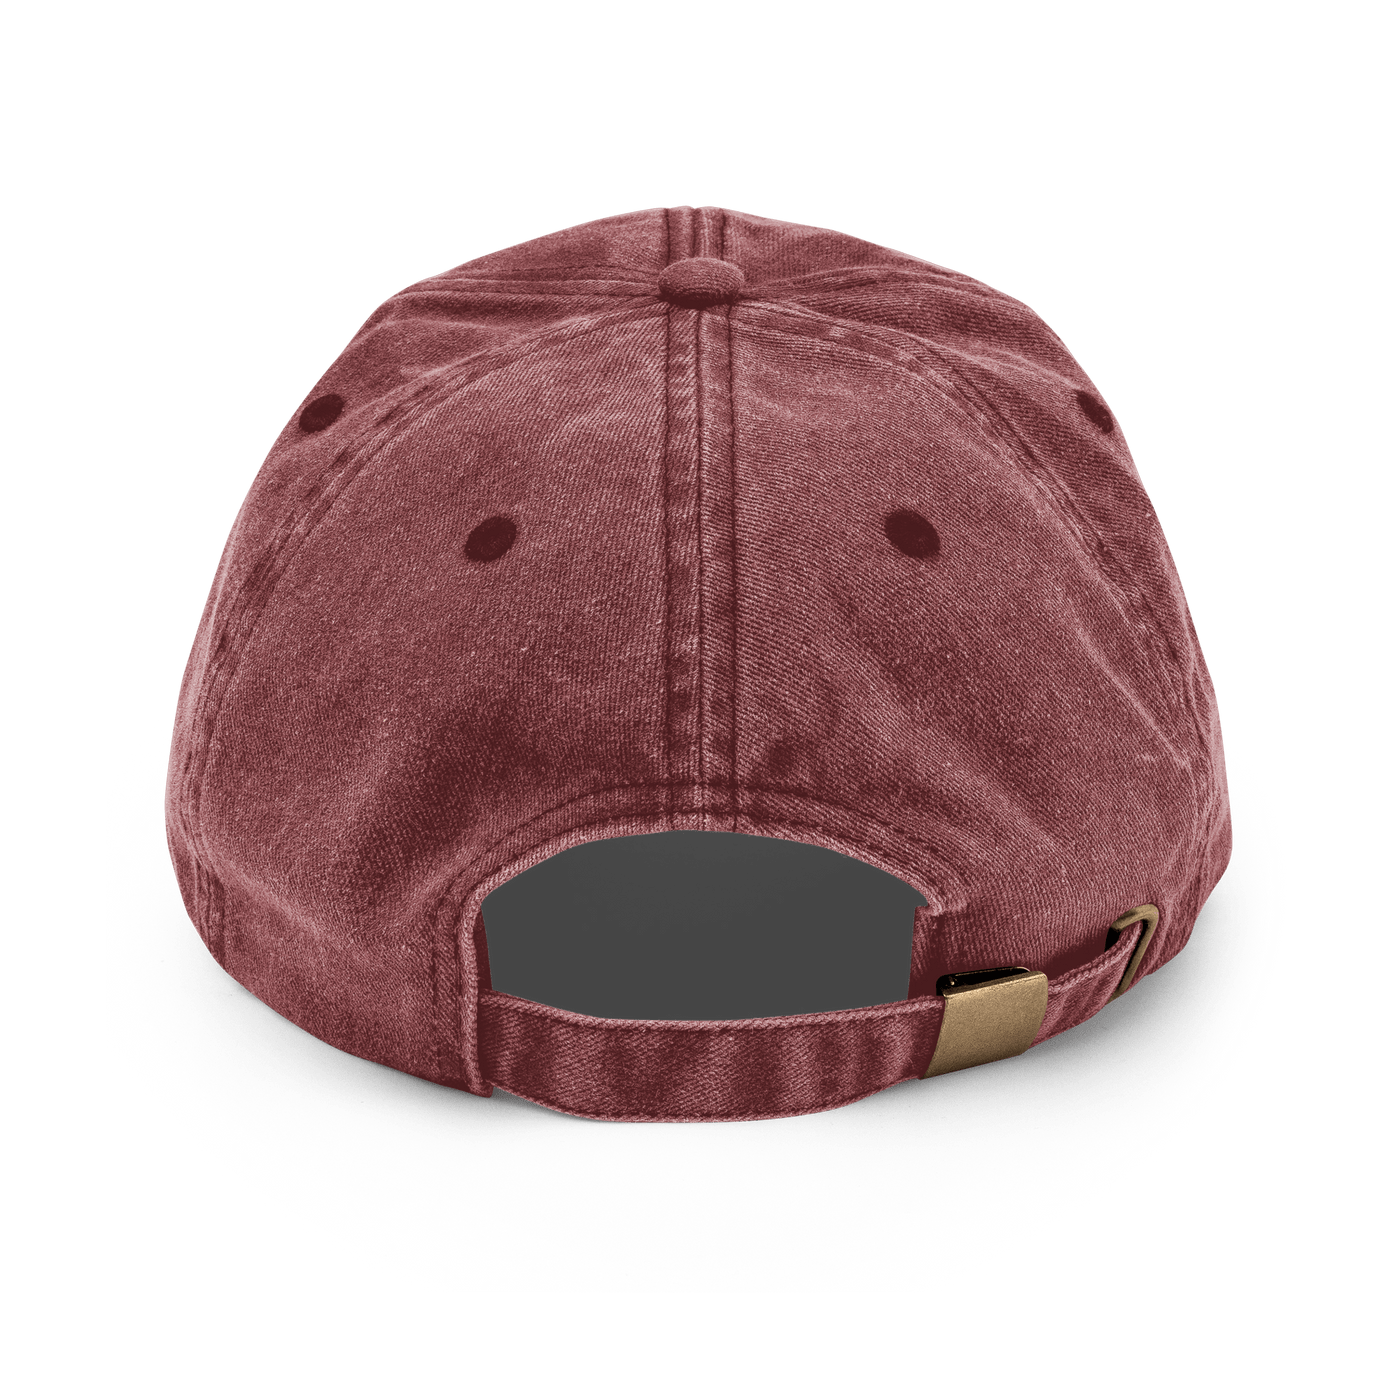 UFO Vintage Hat - Vintage Red - - Just Another Cap Store